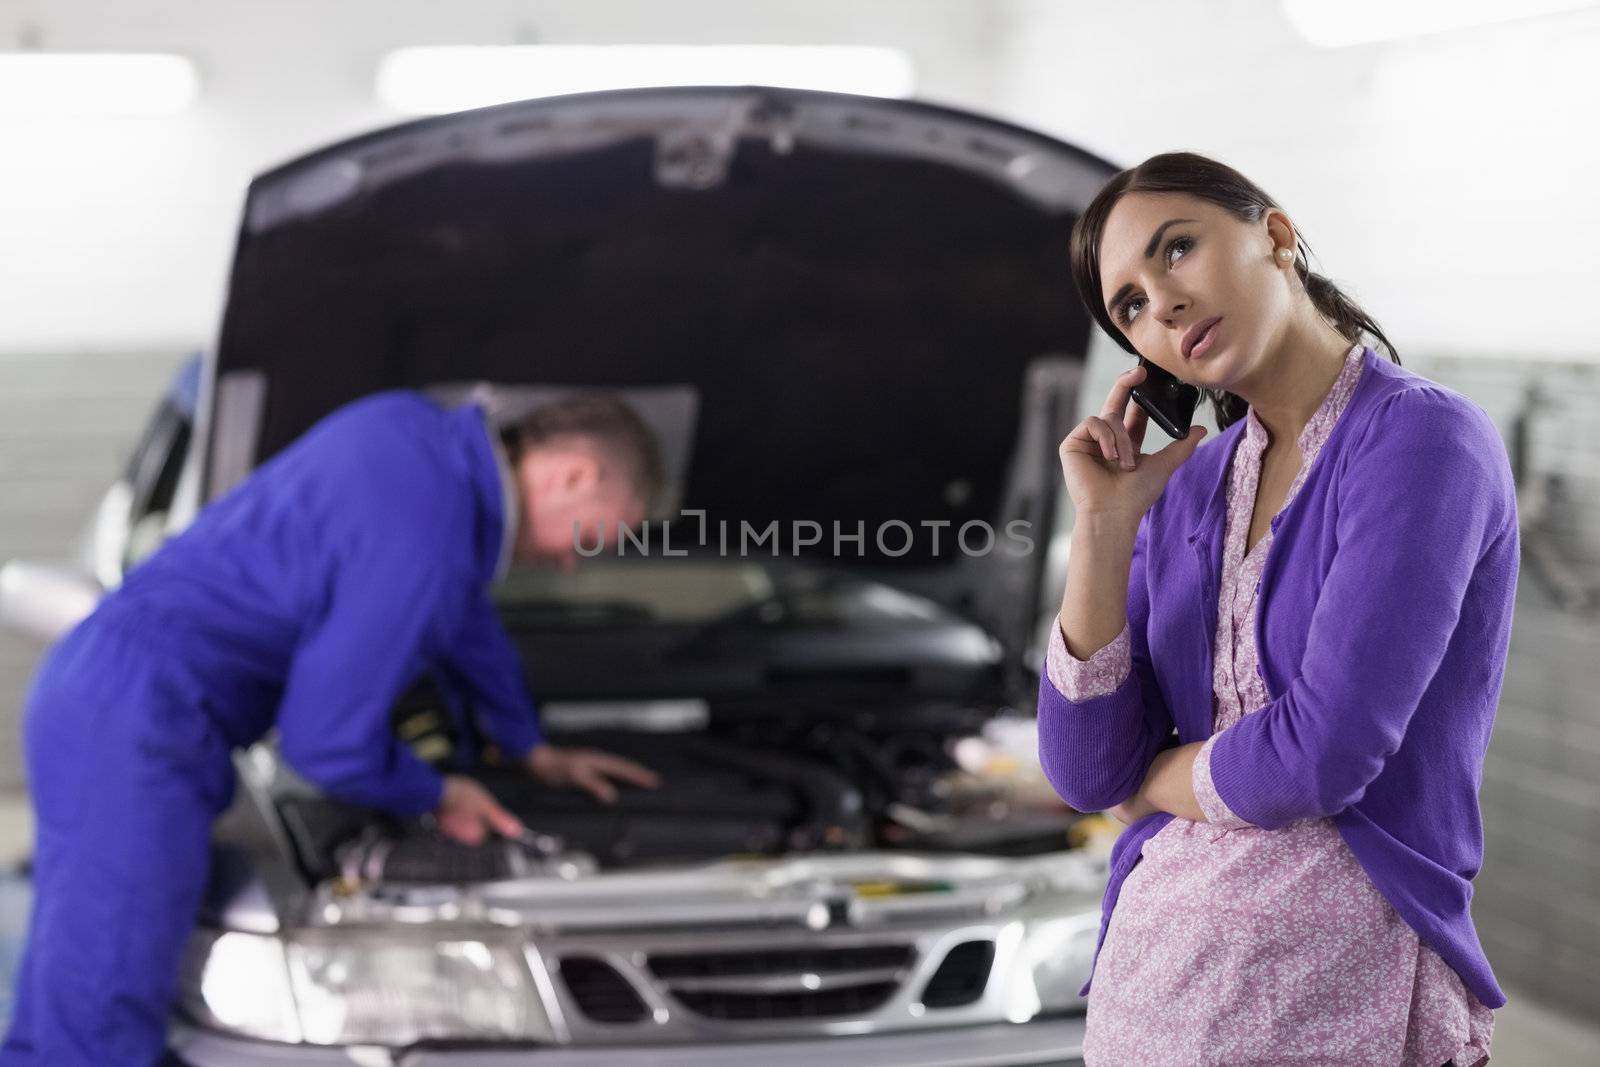 Client calling next to a mechanic in a garage